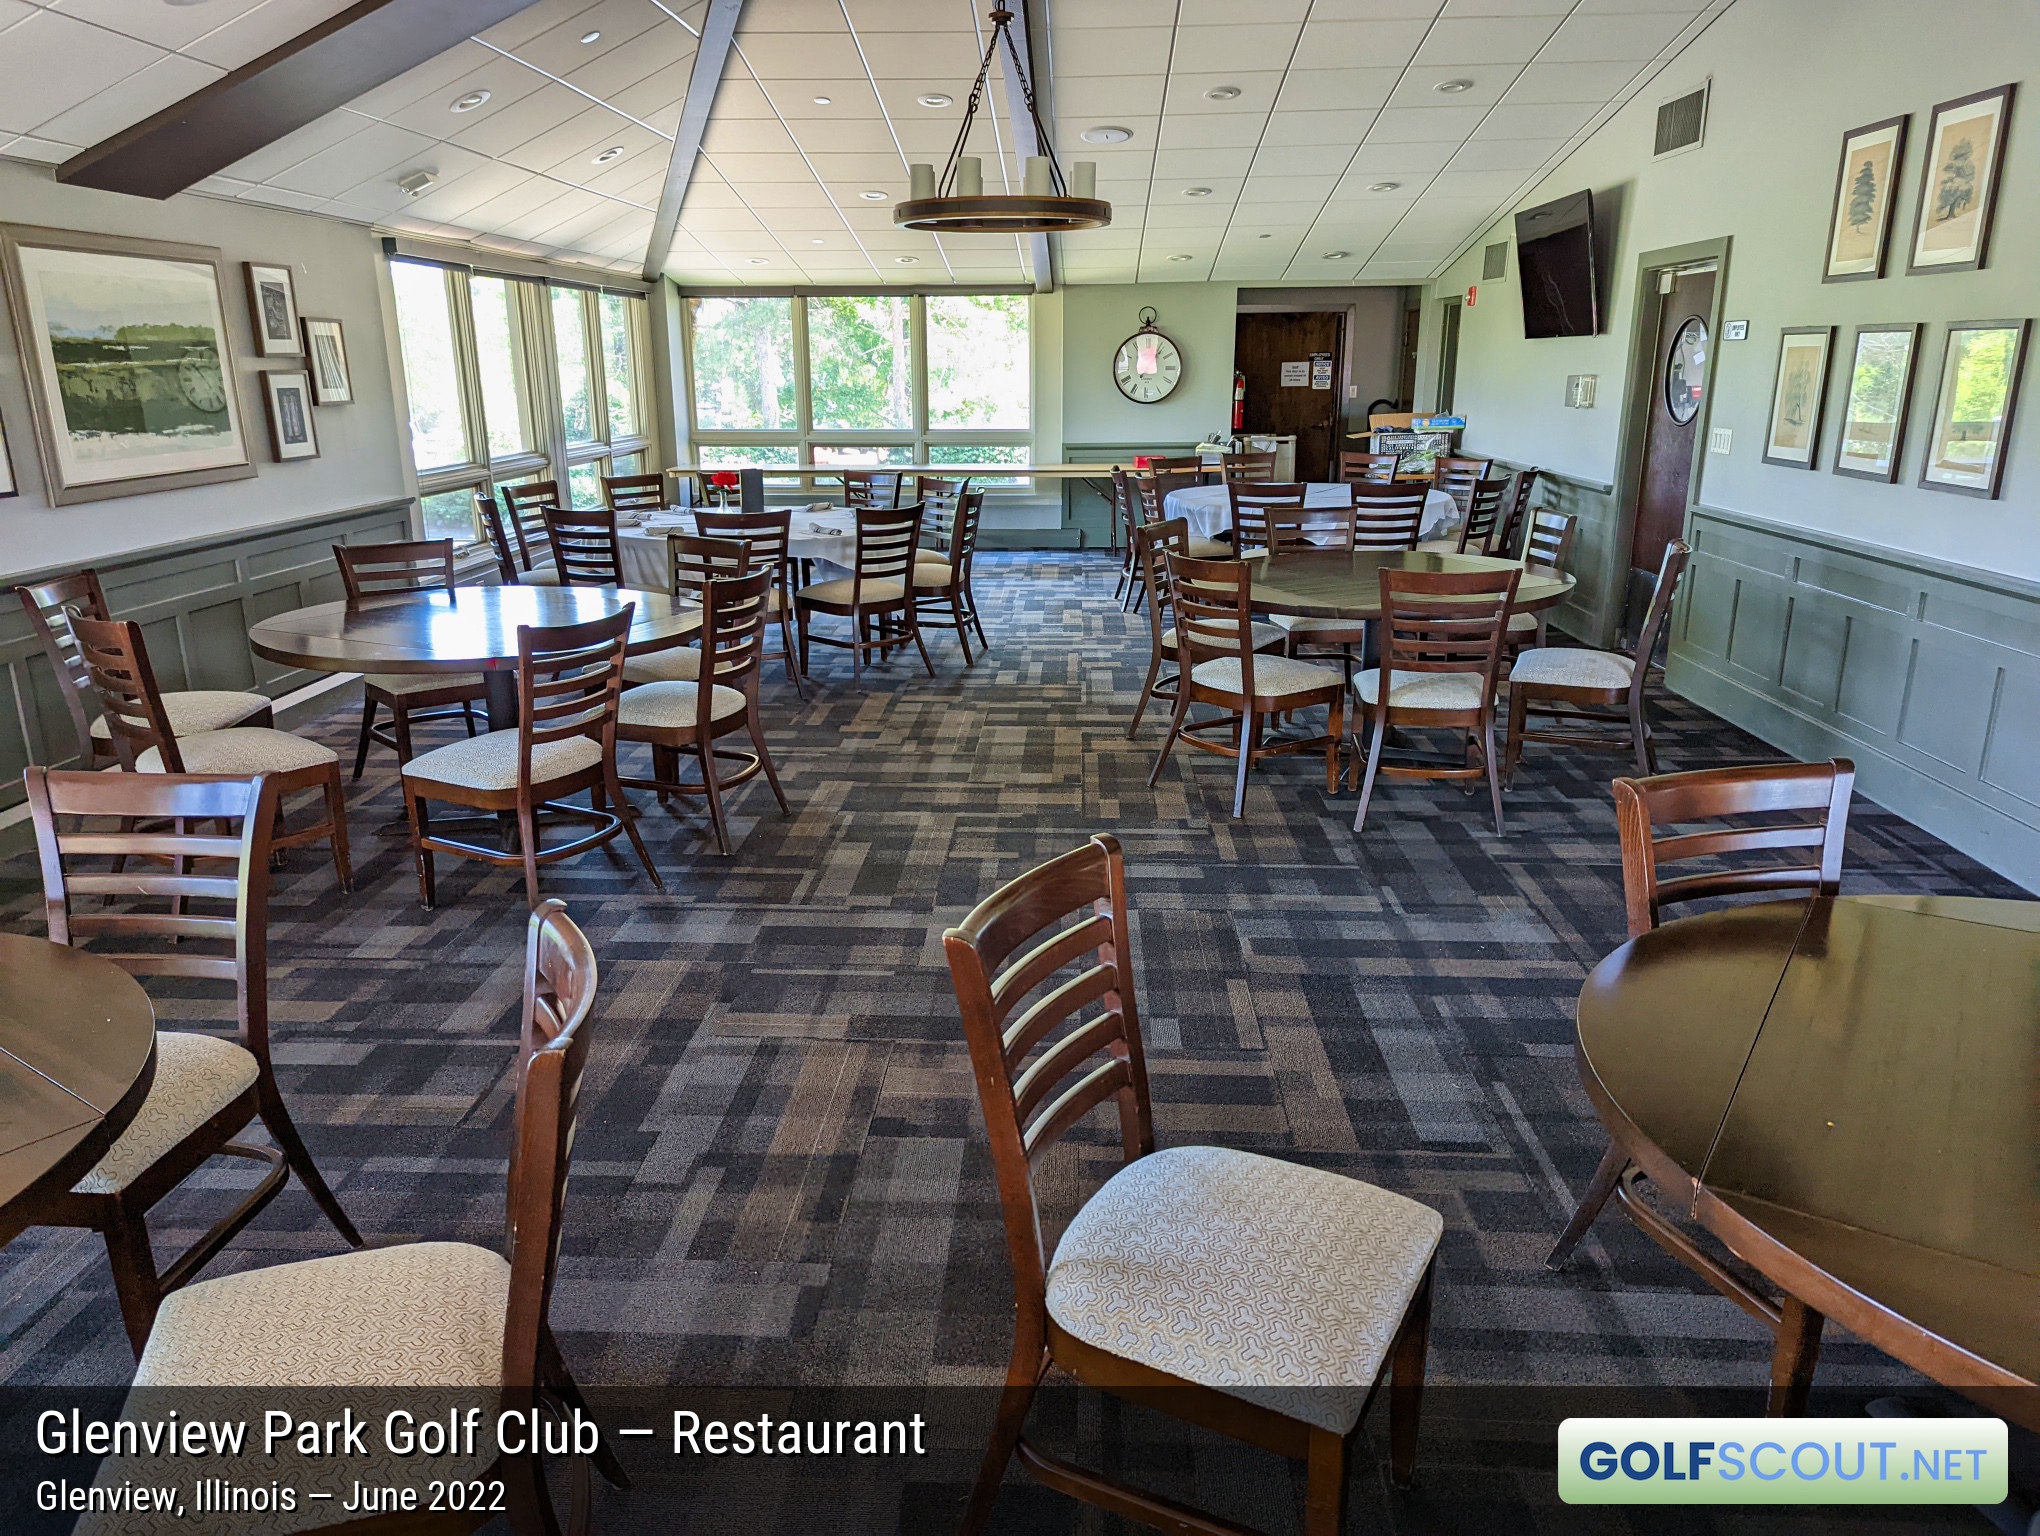 Photo of the restaurant at Glenview Park Golf Club in Glenview, Illinois. 